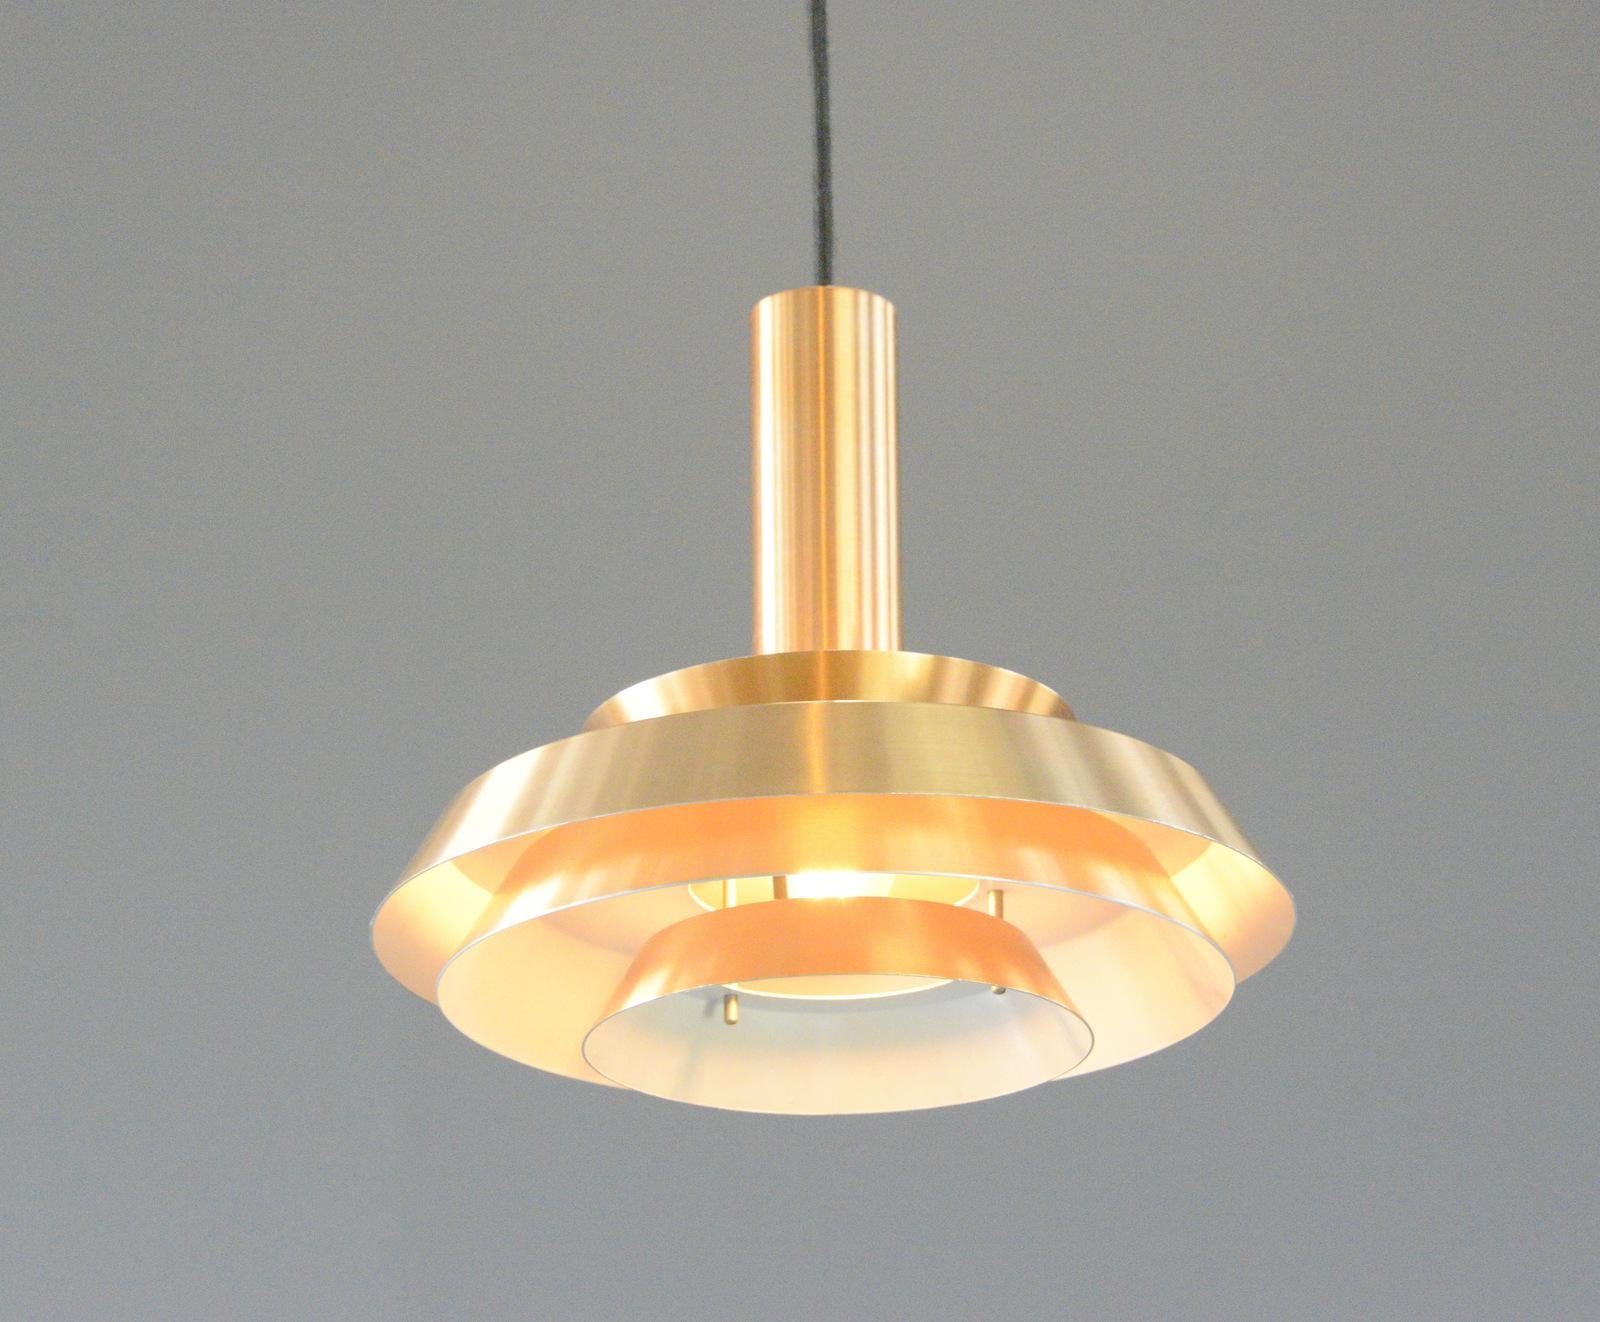 Midcentury Copper Pendant Light by Veb Metaldrucker Halle circa 1970s In Good Condition For Sale In Gloucester, GB